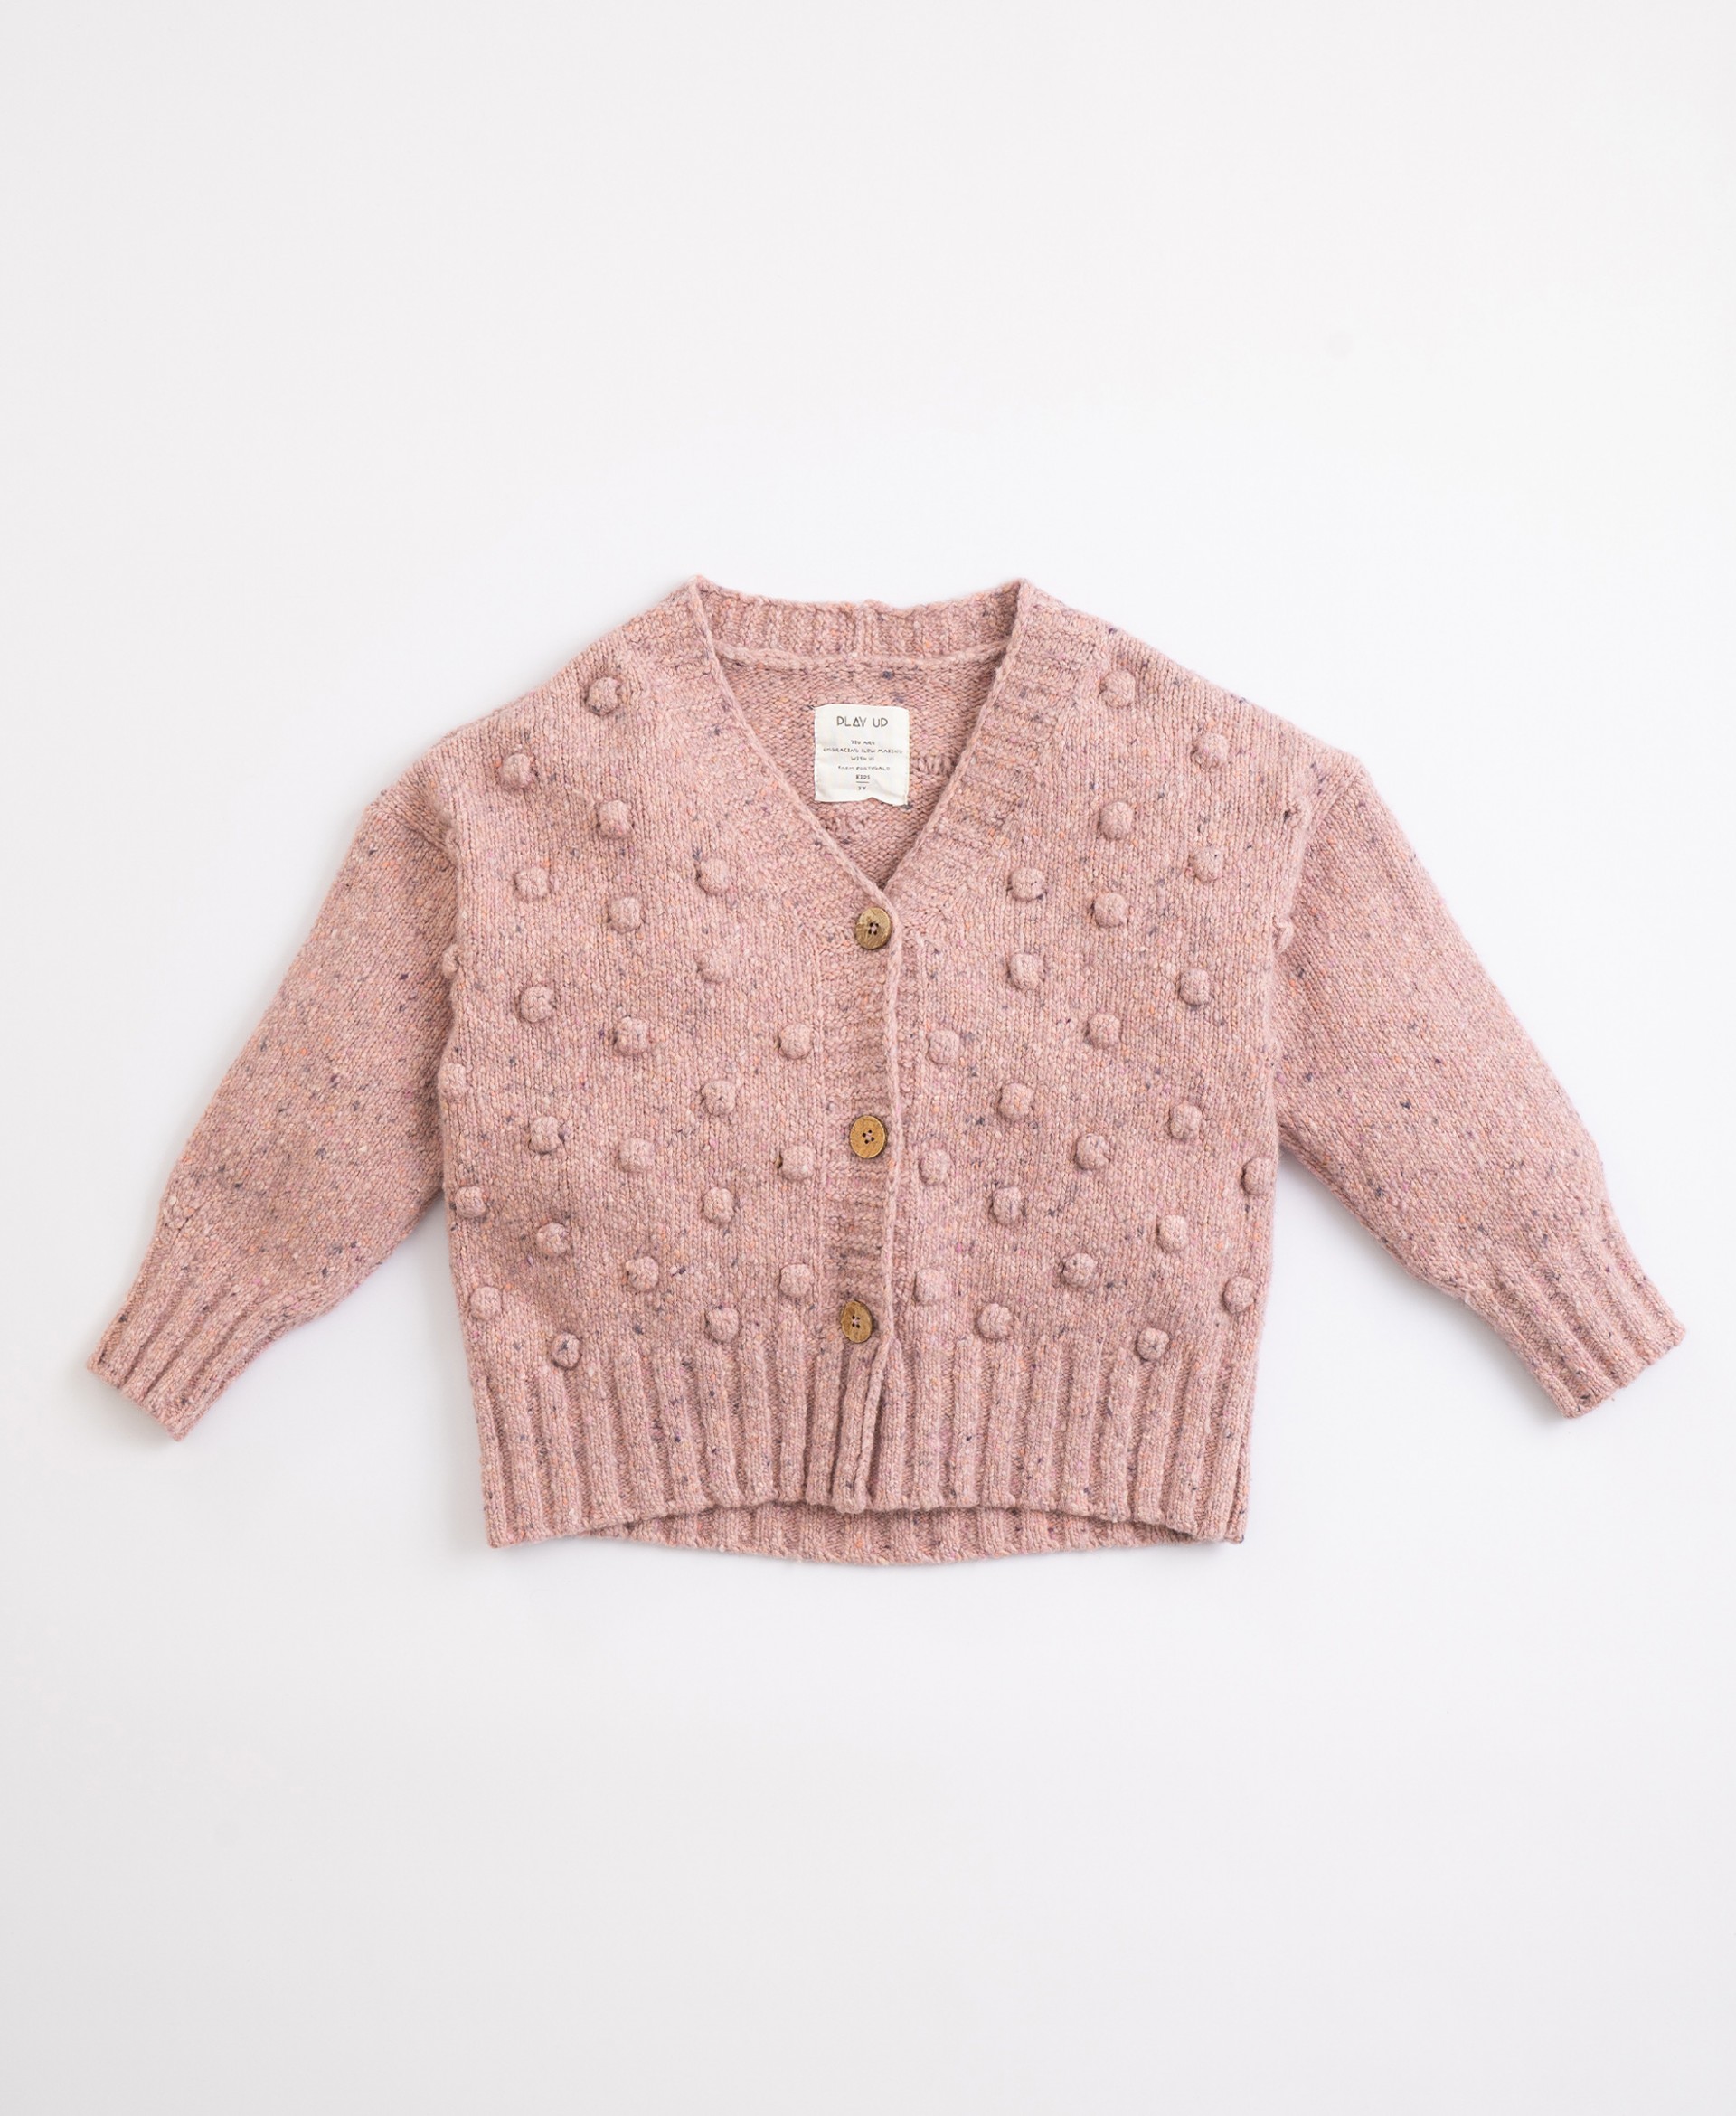 Knitted Jacket with coconut buttons | Illustration